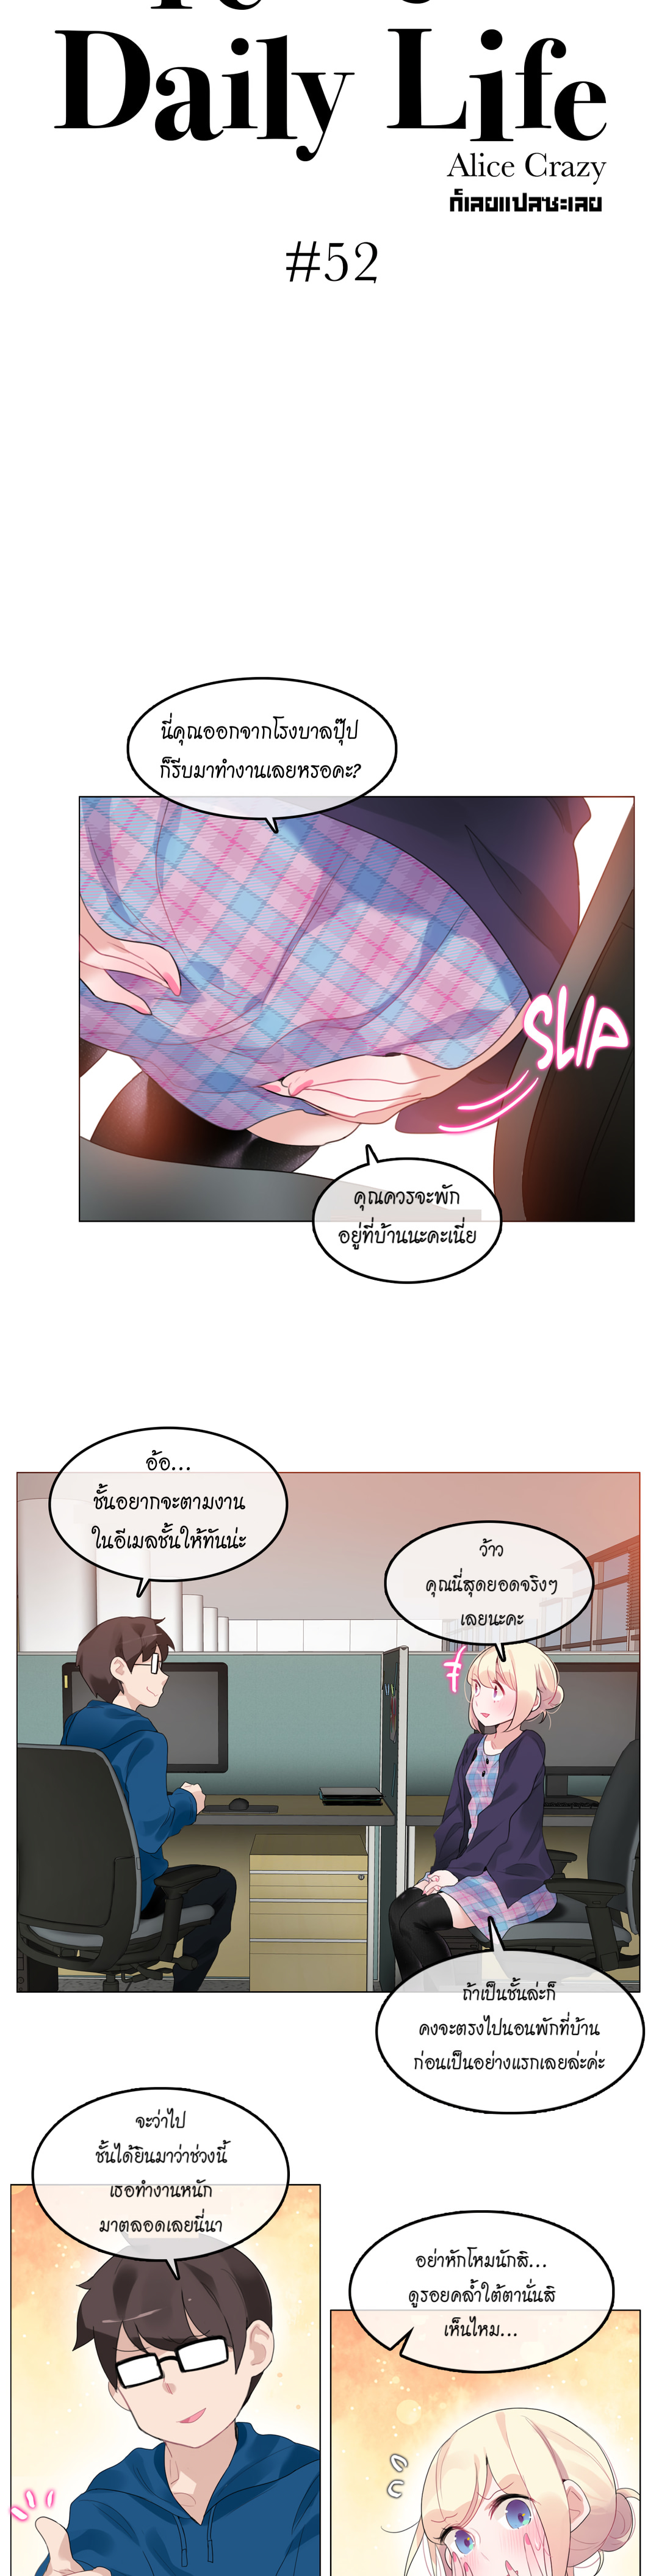 A Pervert’s Daily Life52 (3)